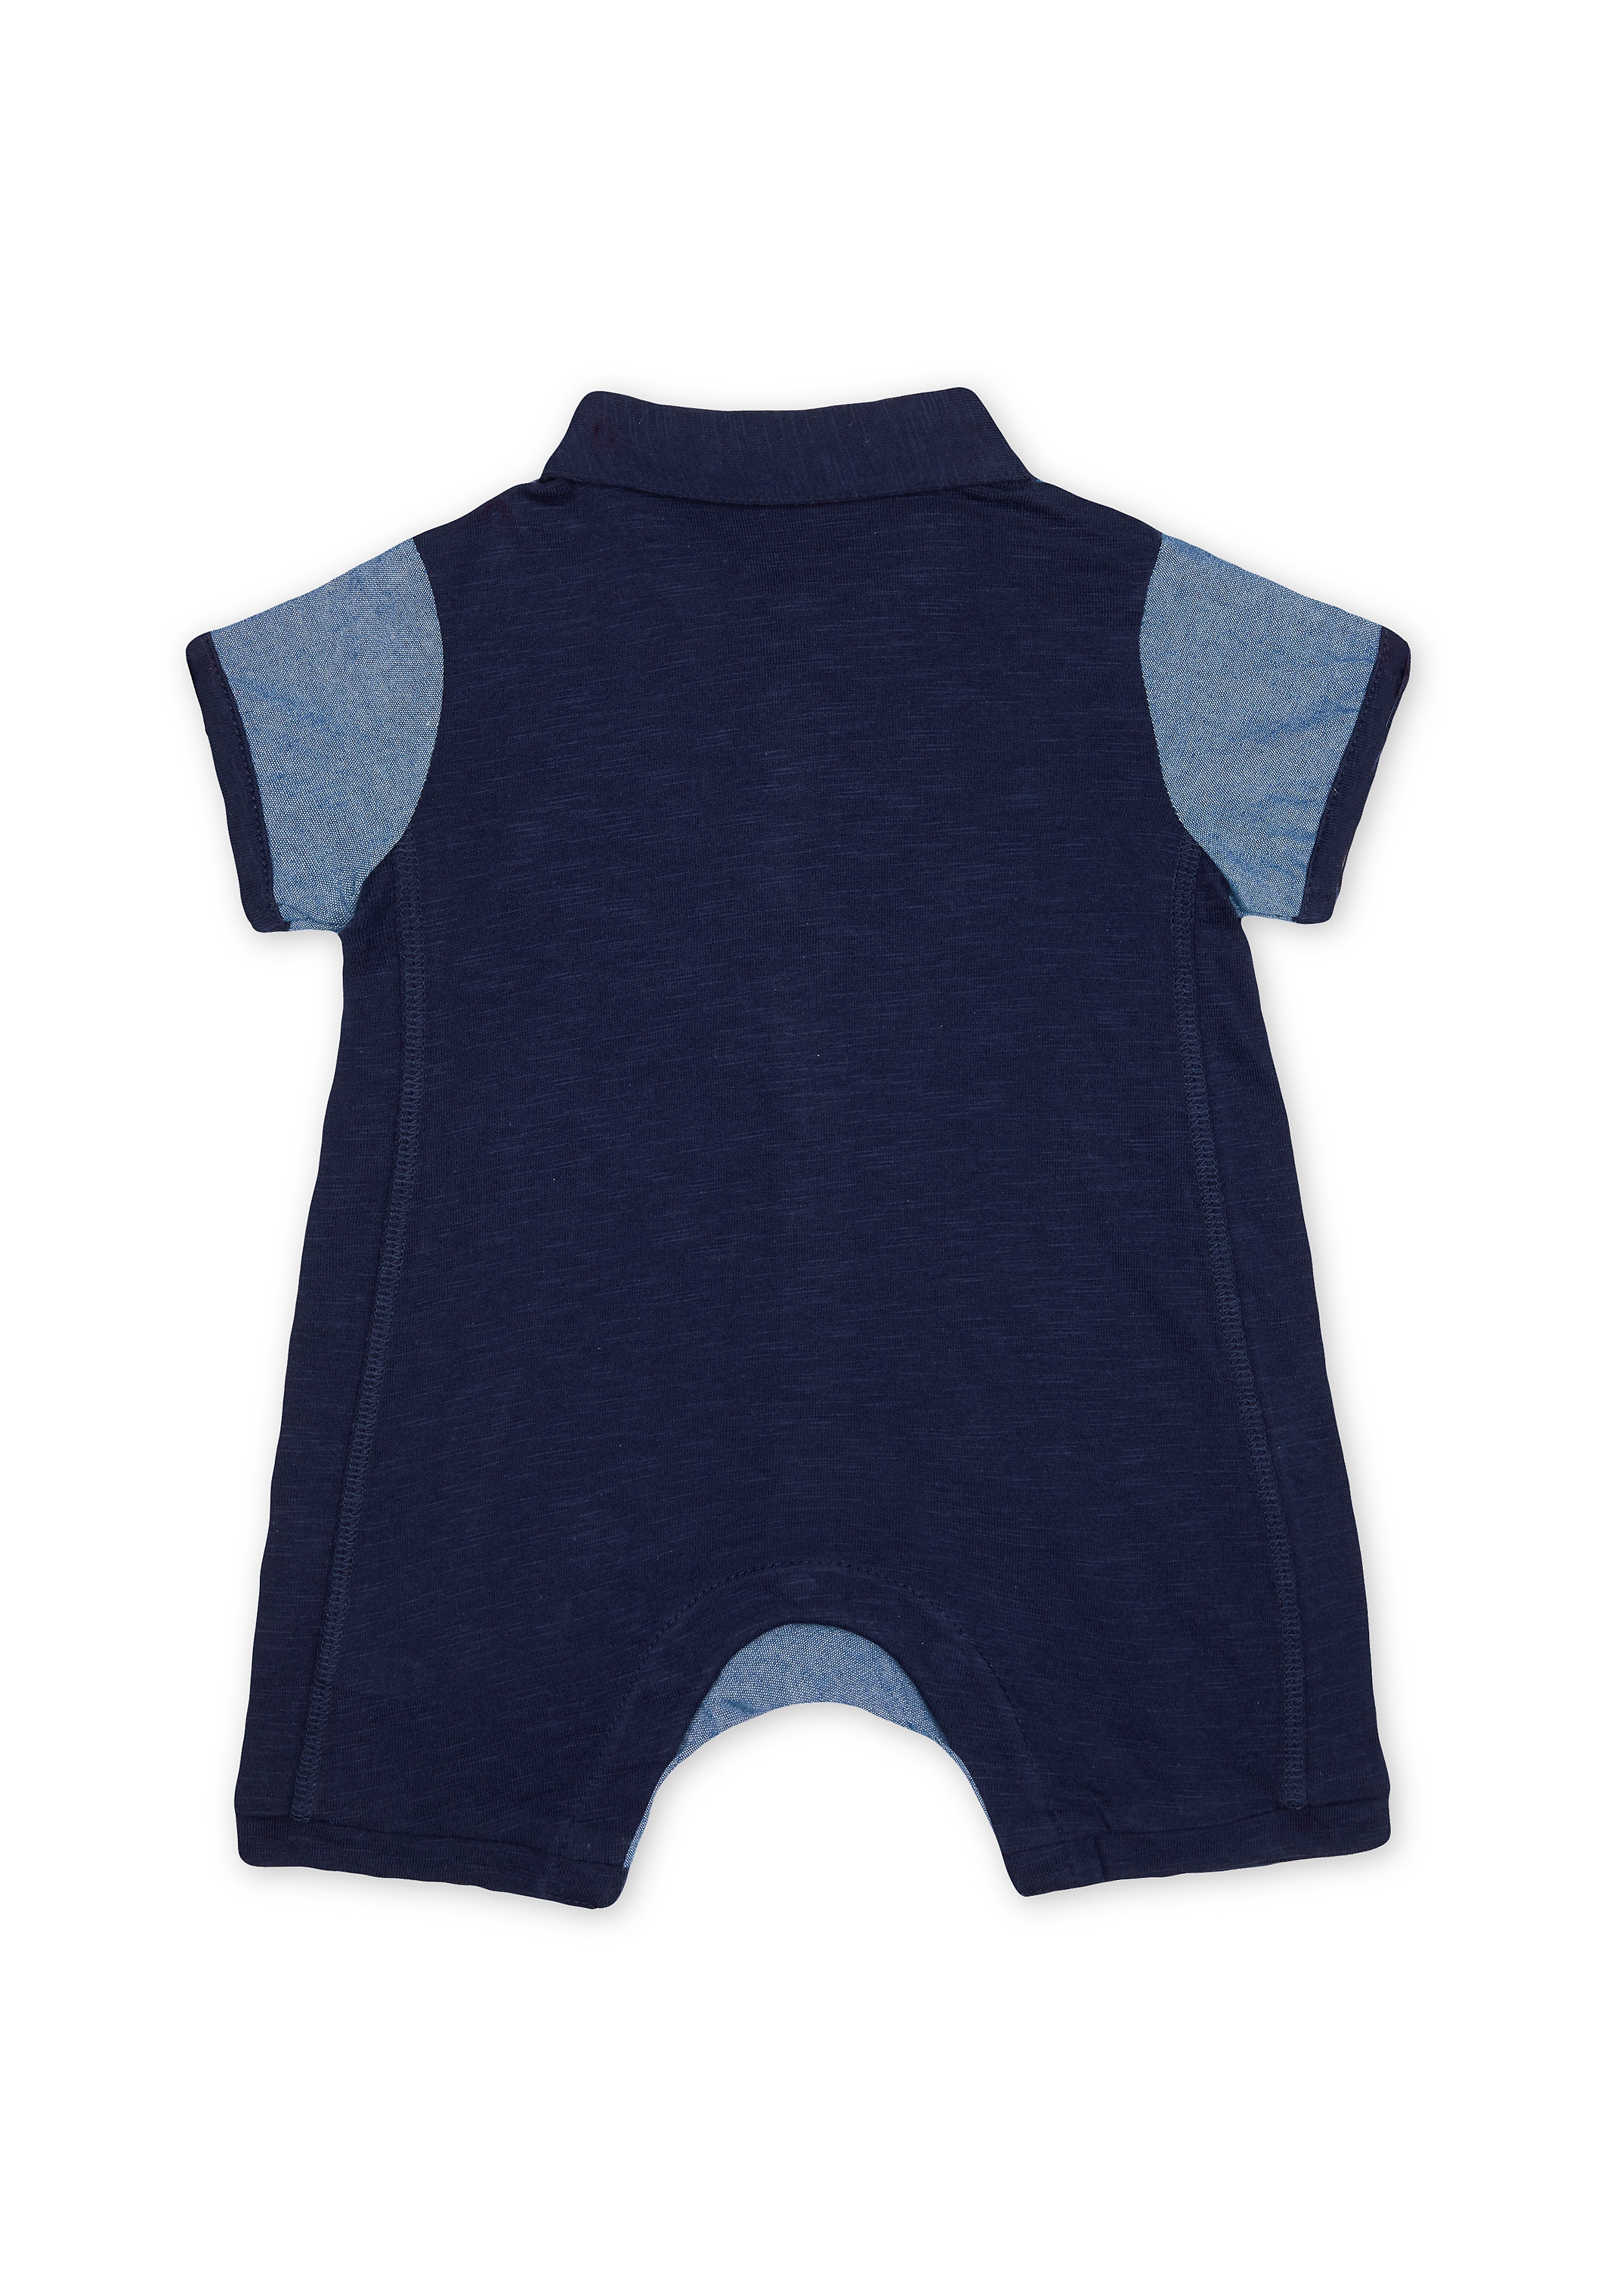 Mothercare | Boys Half Sleeves Romper Vehicle Embroidery - Navy 1